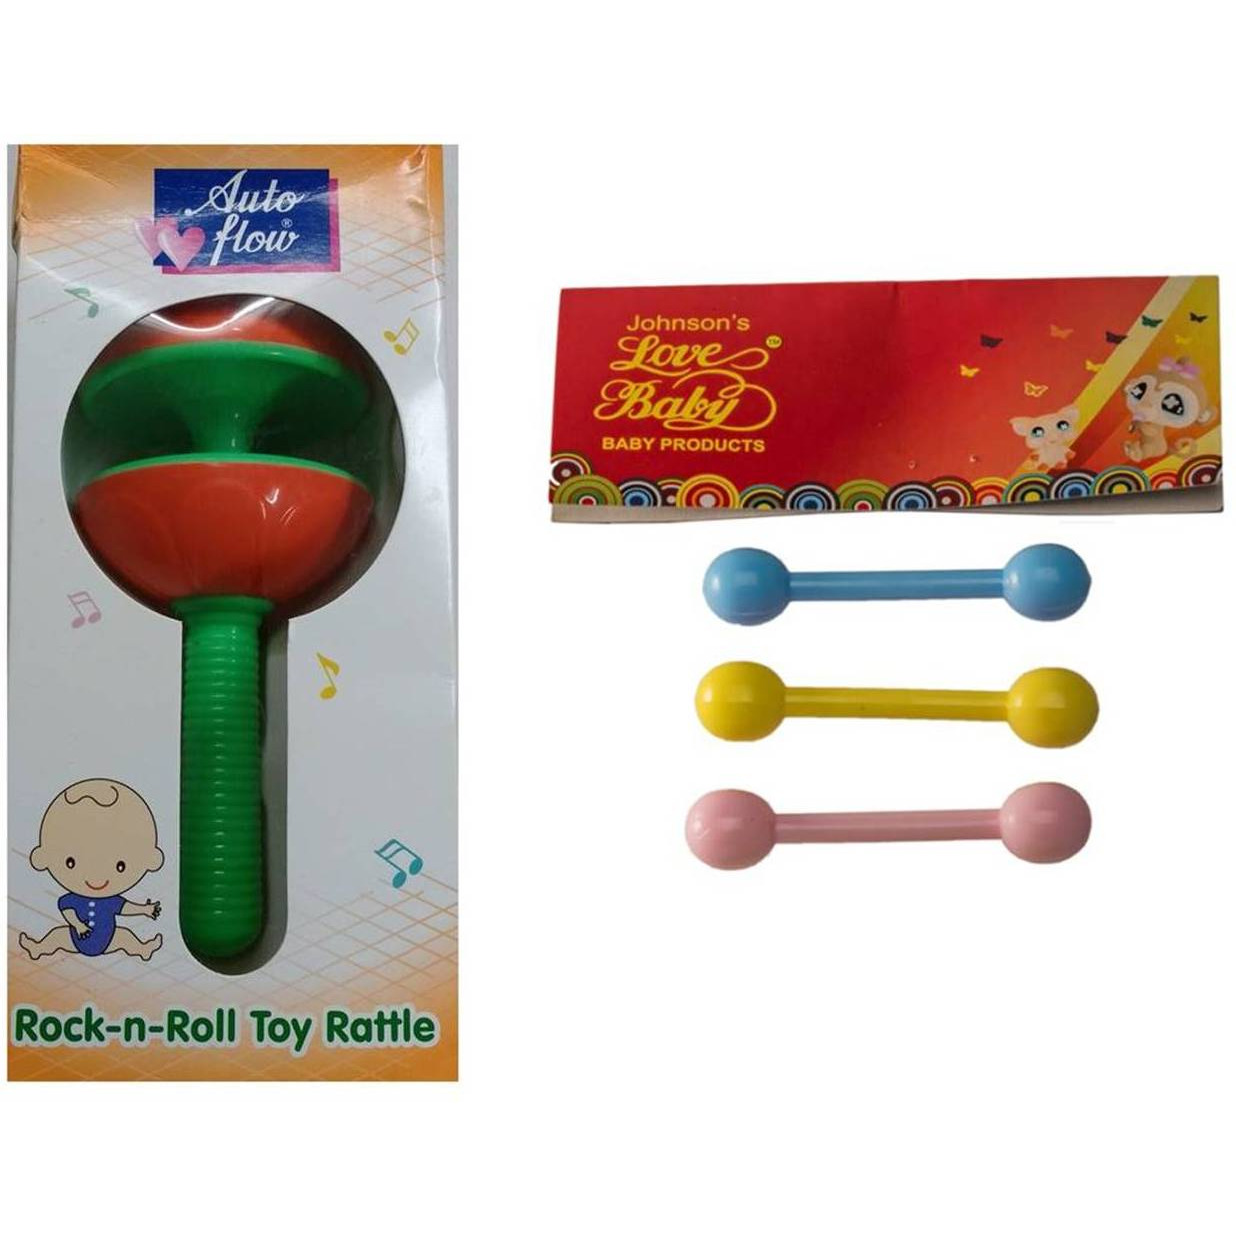 Auto Flow Rattle Toy - Rock-N-Roll - BT23 Combo Green